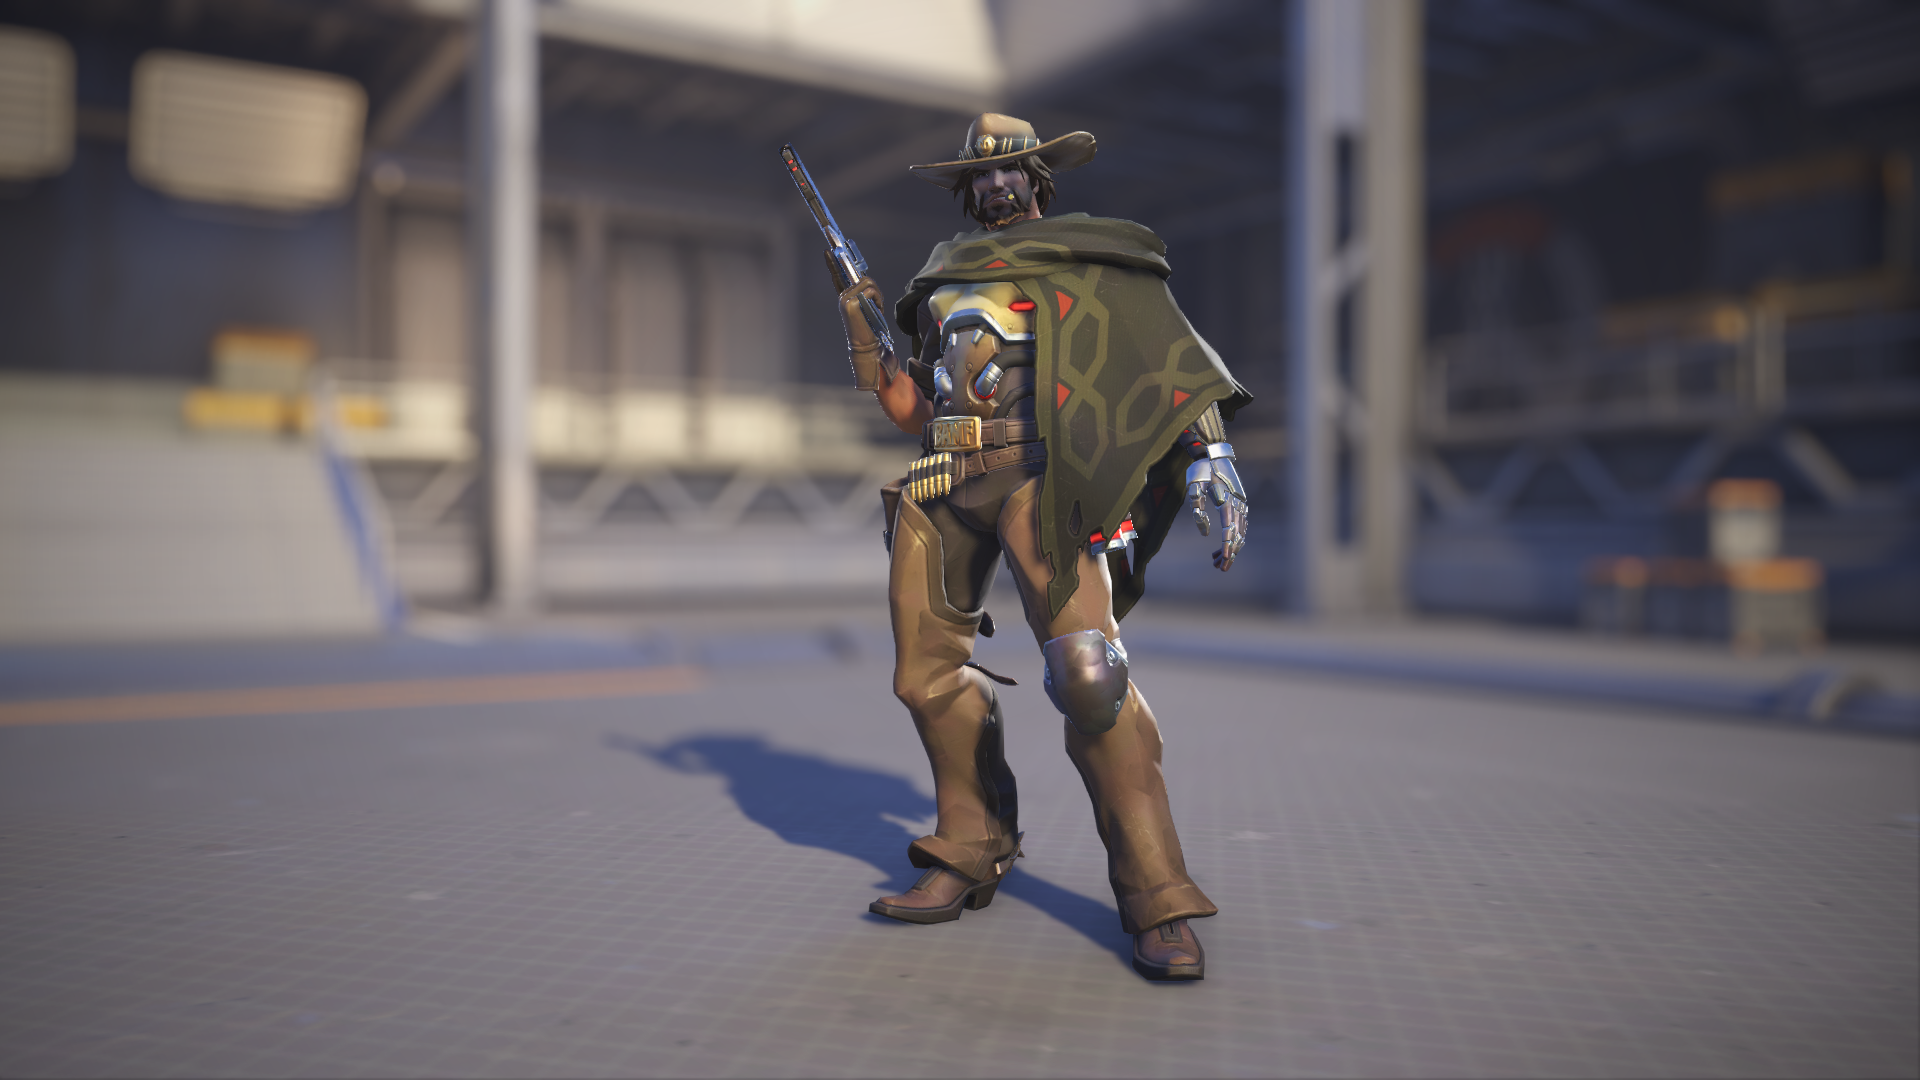 Cassidy models his Ebony skin in Overwatch 2.